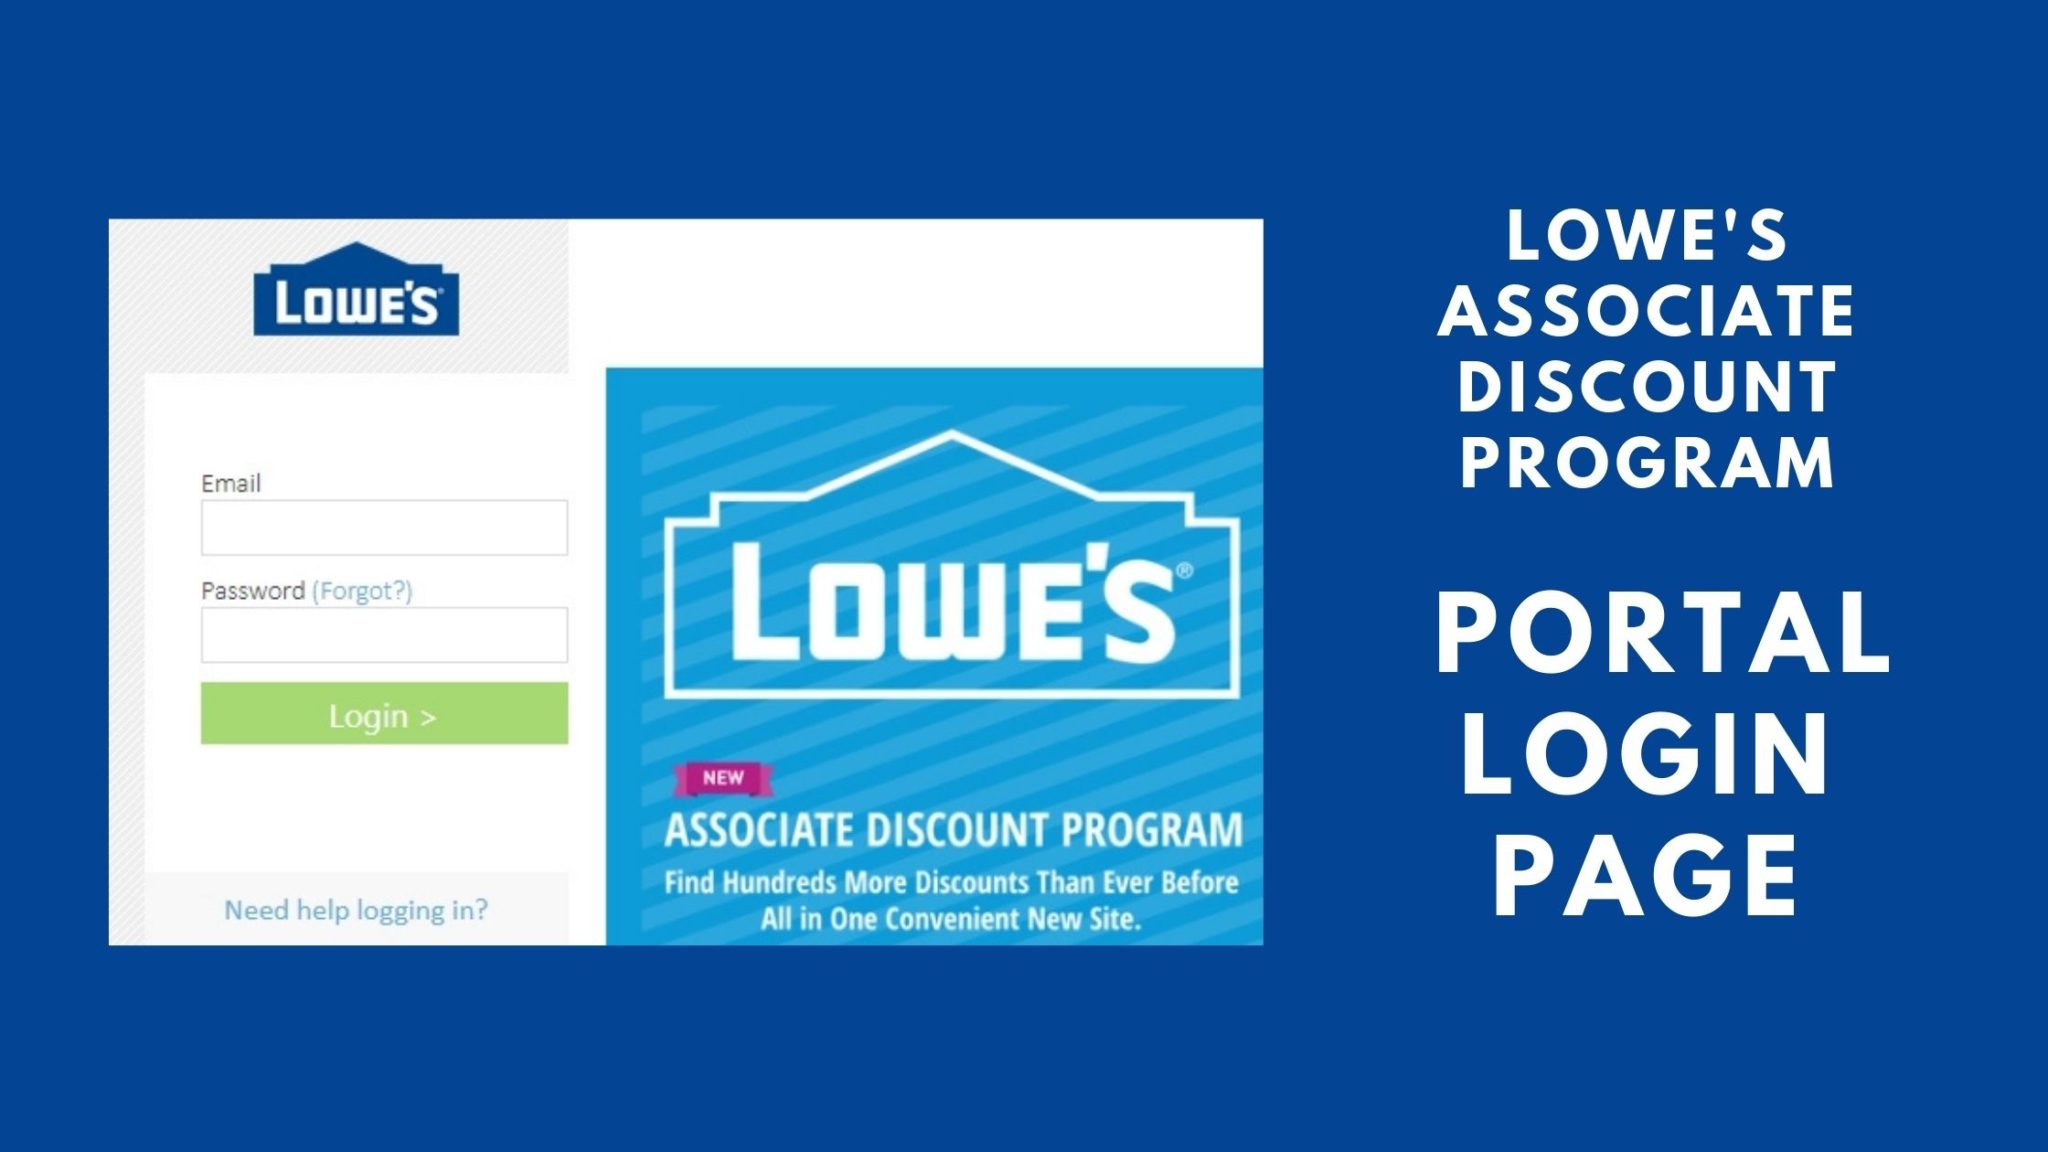 Lowes First Responder Discount Program - wide 8